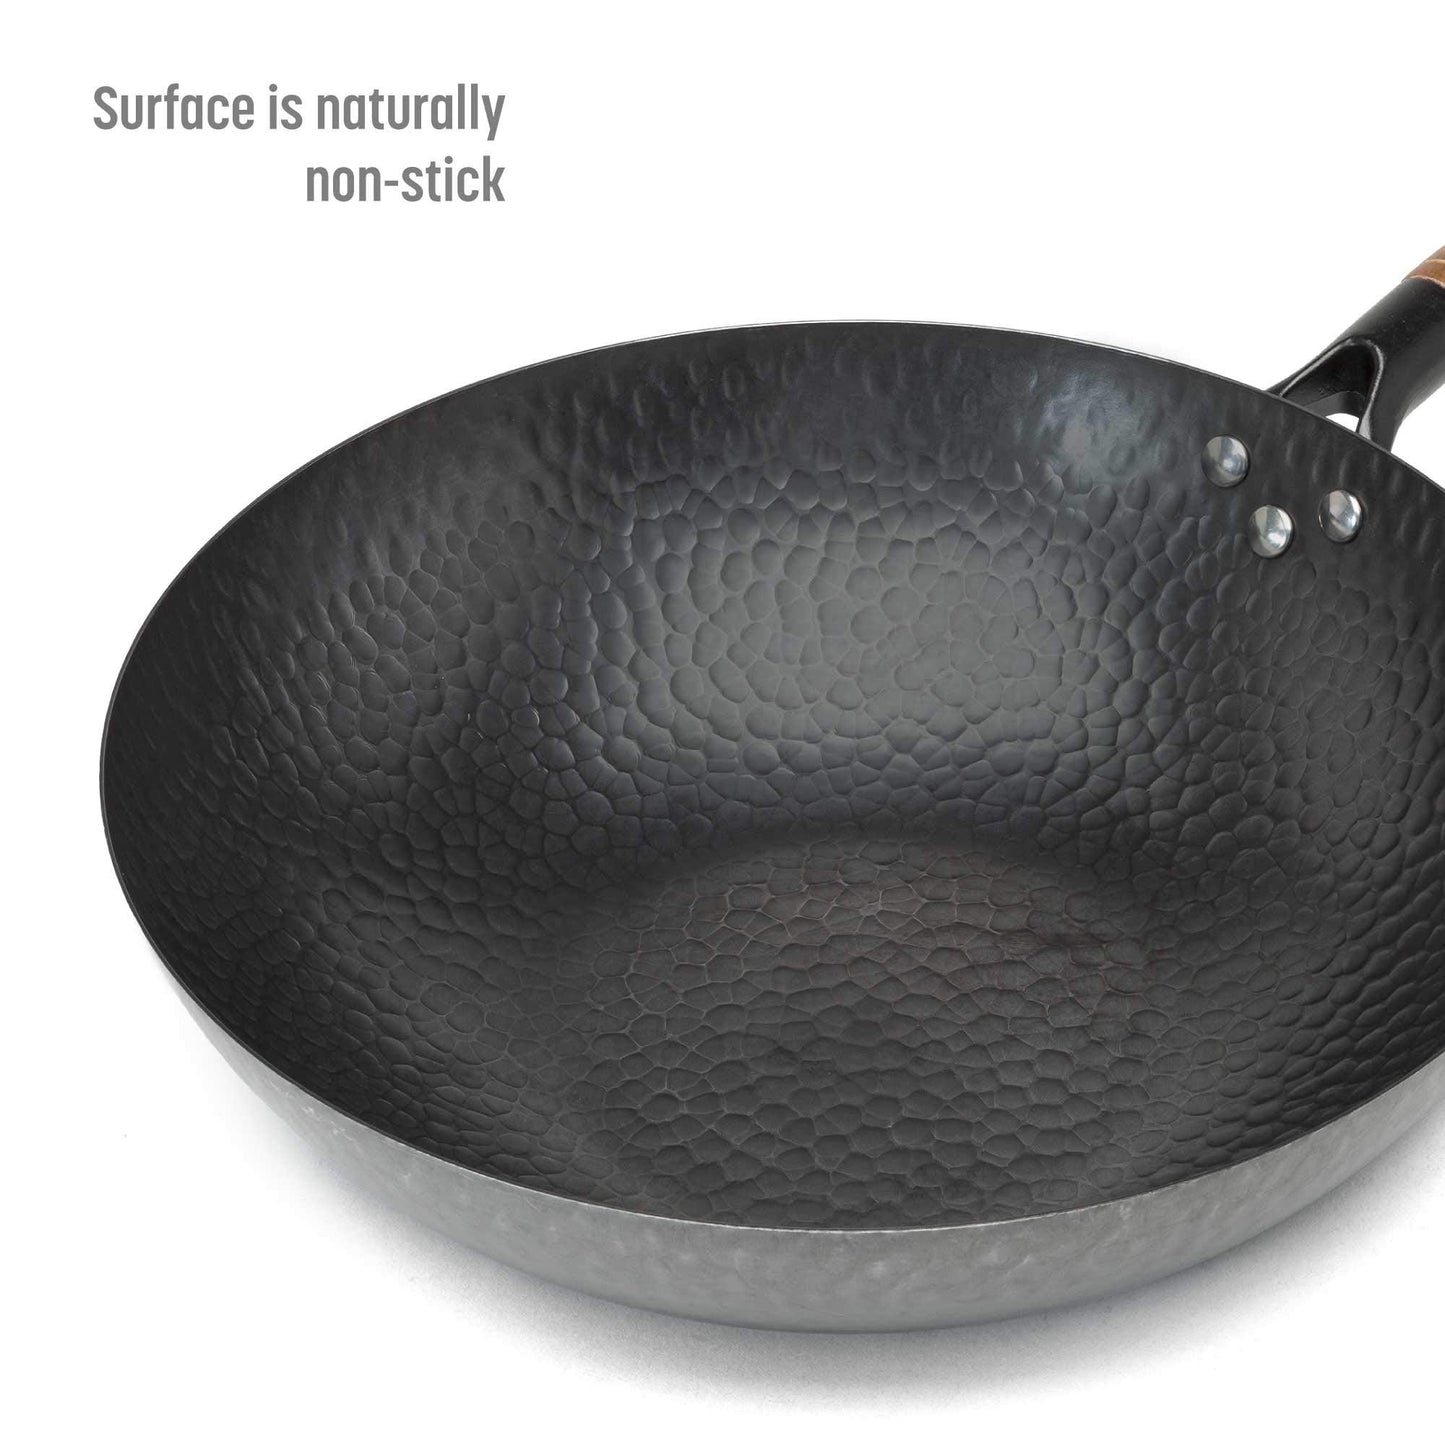 Goodful Hammered Carbon Steel 13-Inch Wok Pan with Lid, Black, Non-Stick, Compatible with Most Cooktops - CookCave